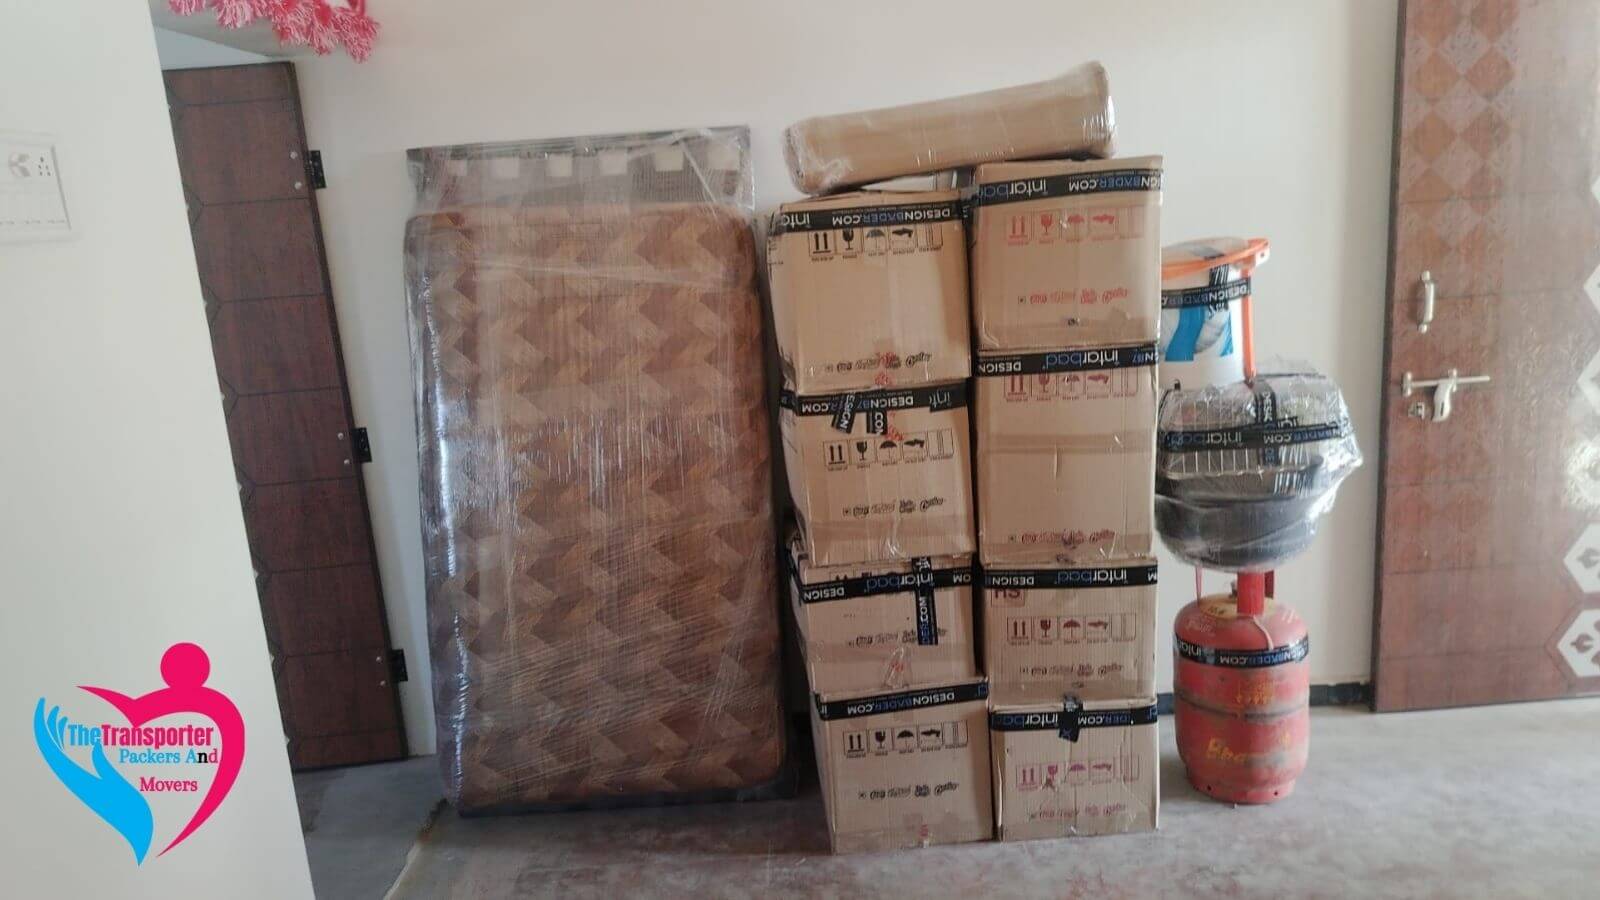 TheTransporter Packers and Movers in Ludhiana - Our Commitment to You